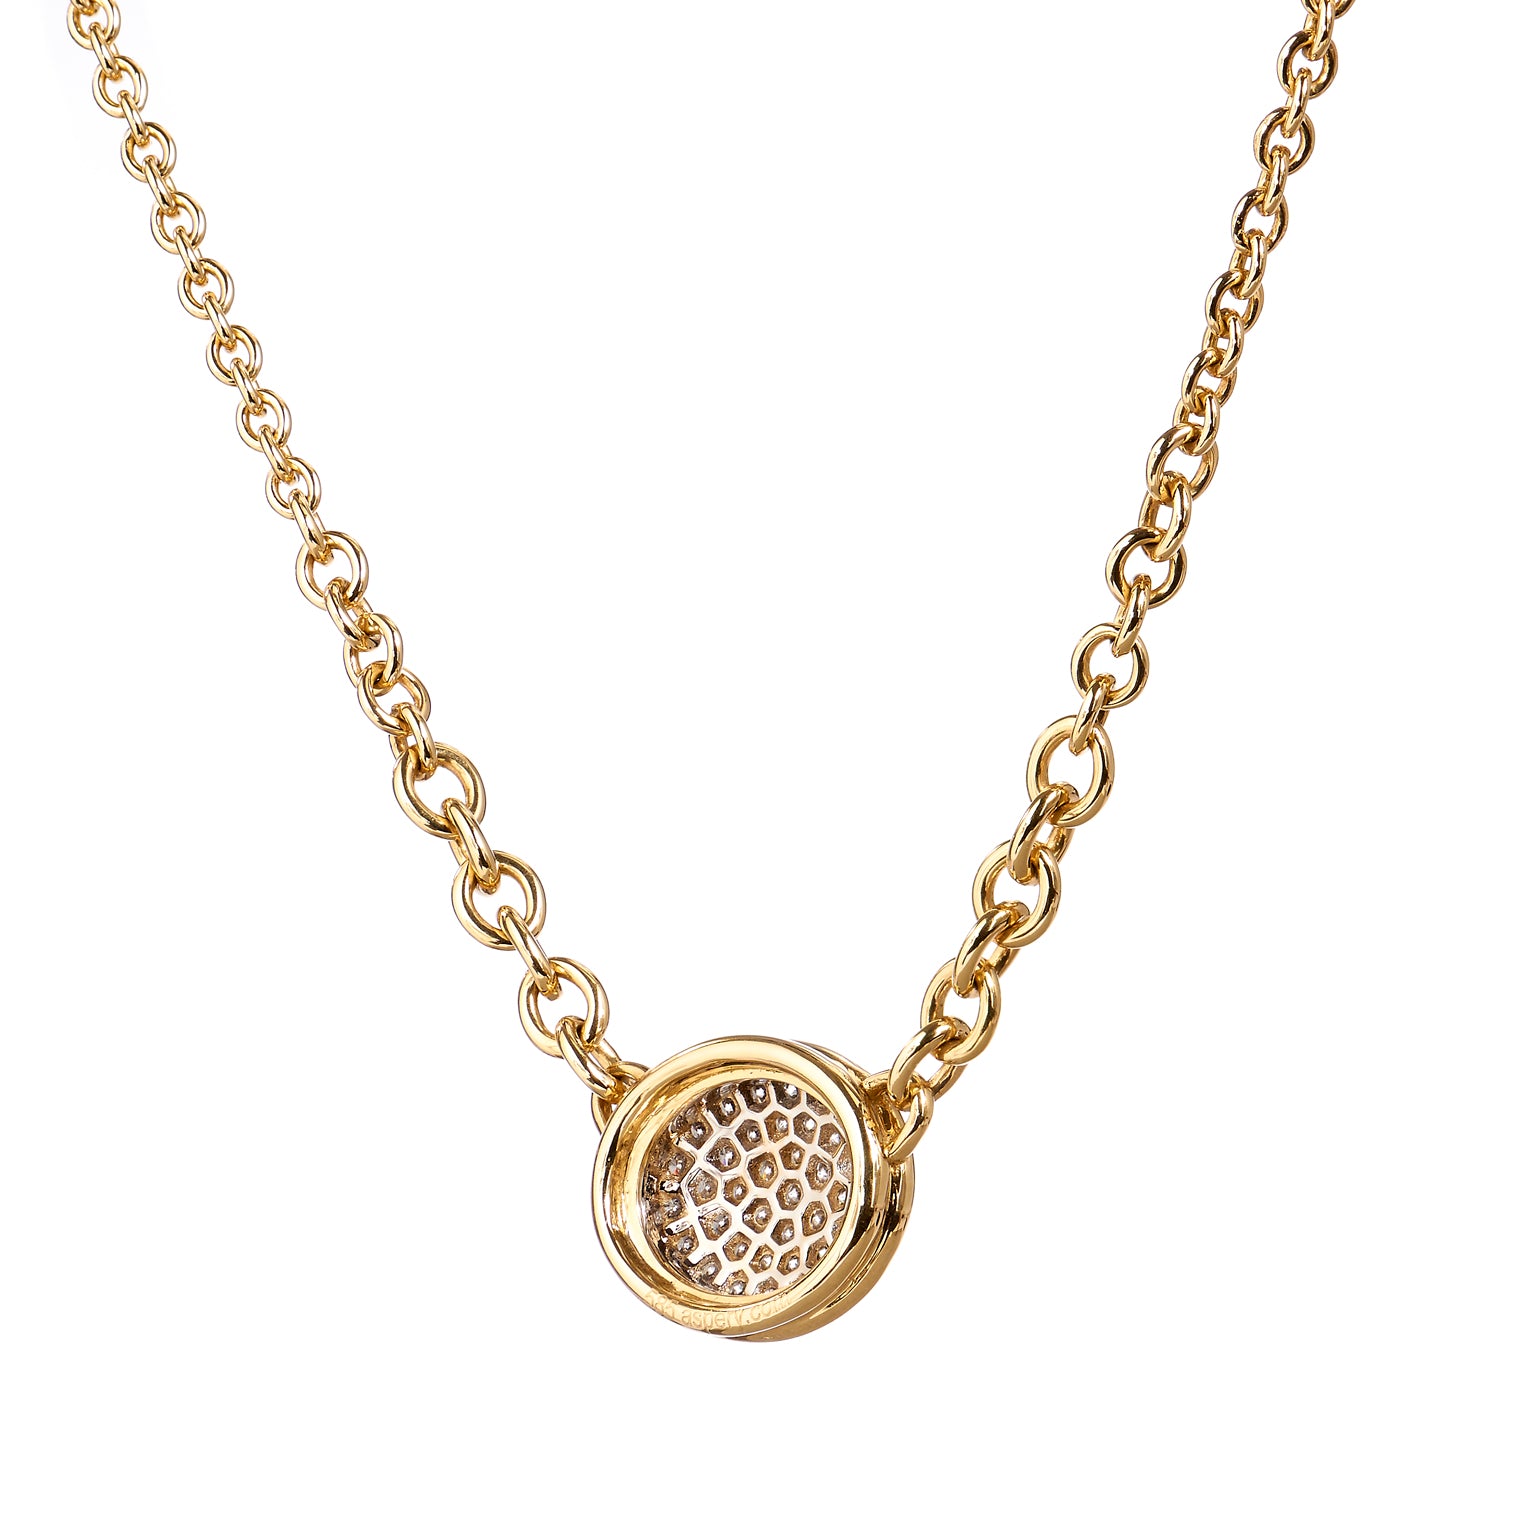 Oval Shape Pave Diamond Necklace Necklaces Curated by H